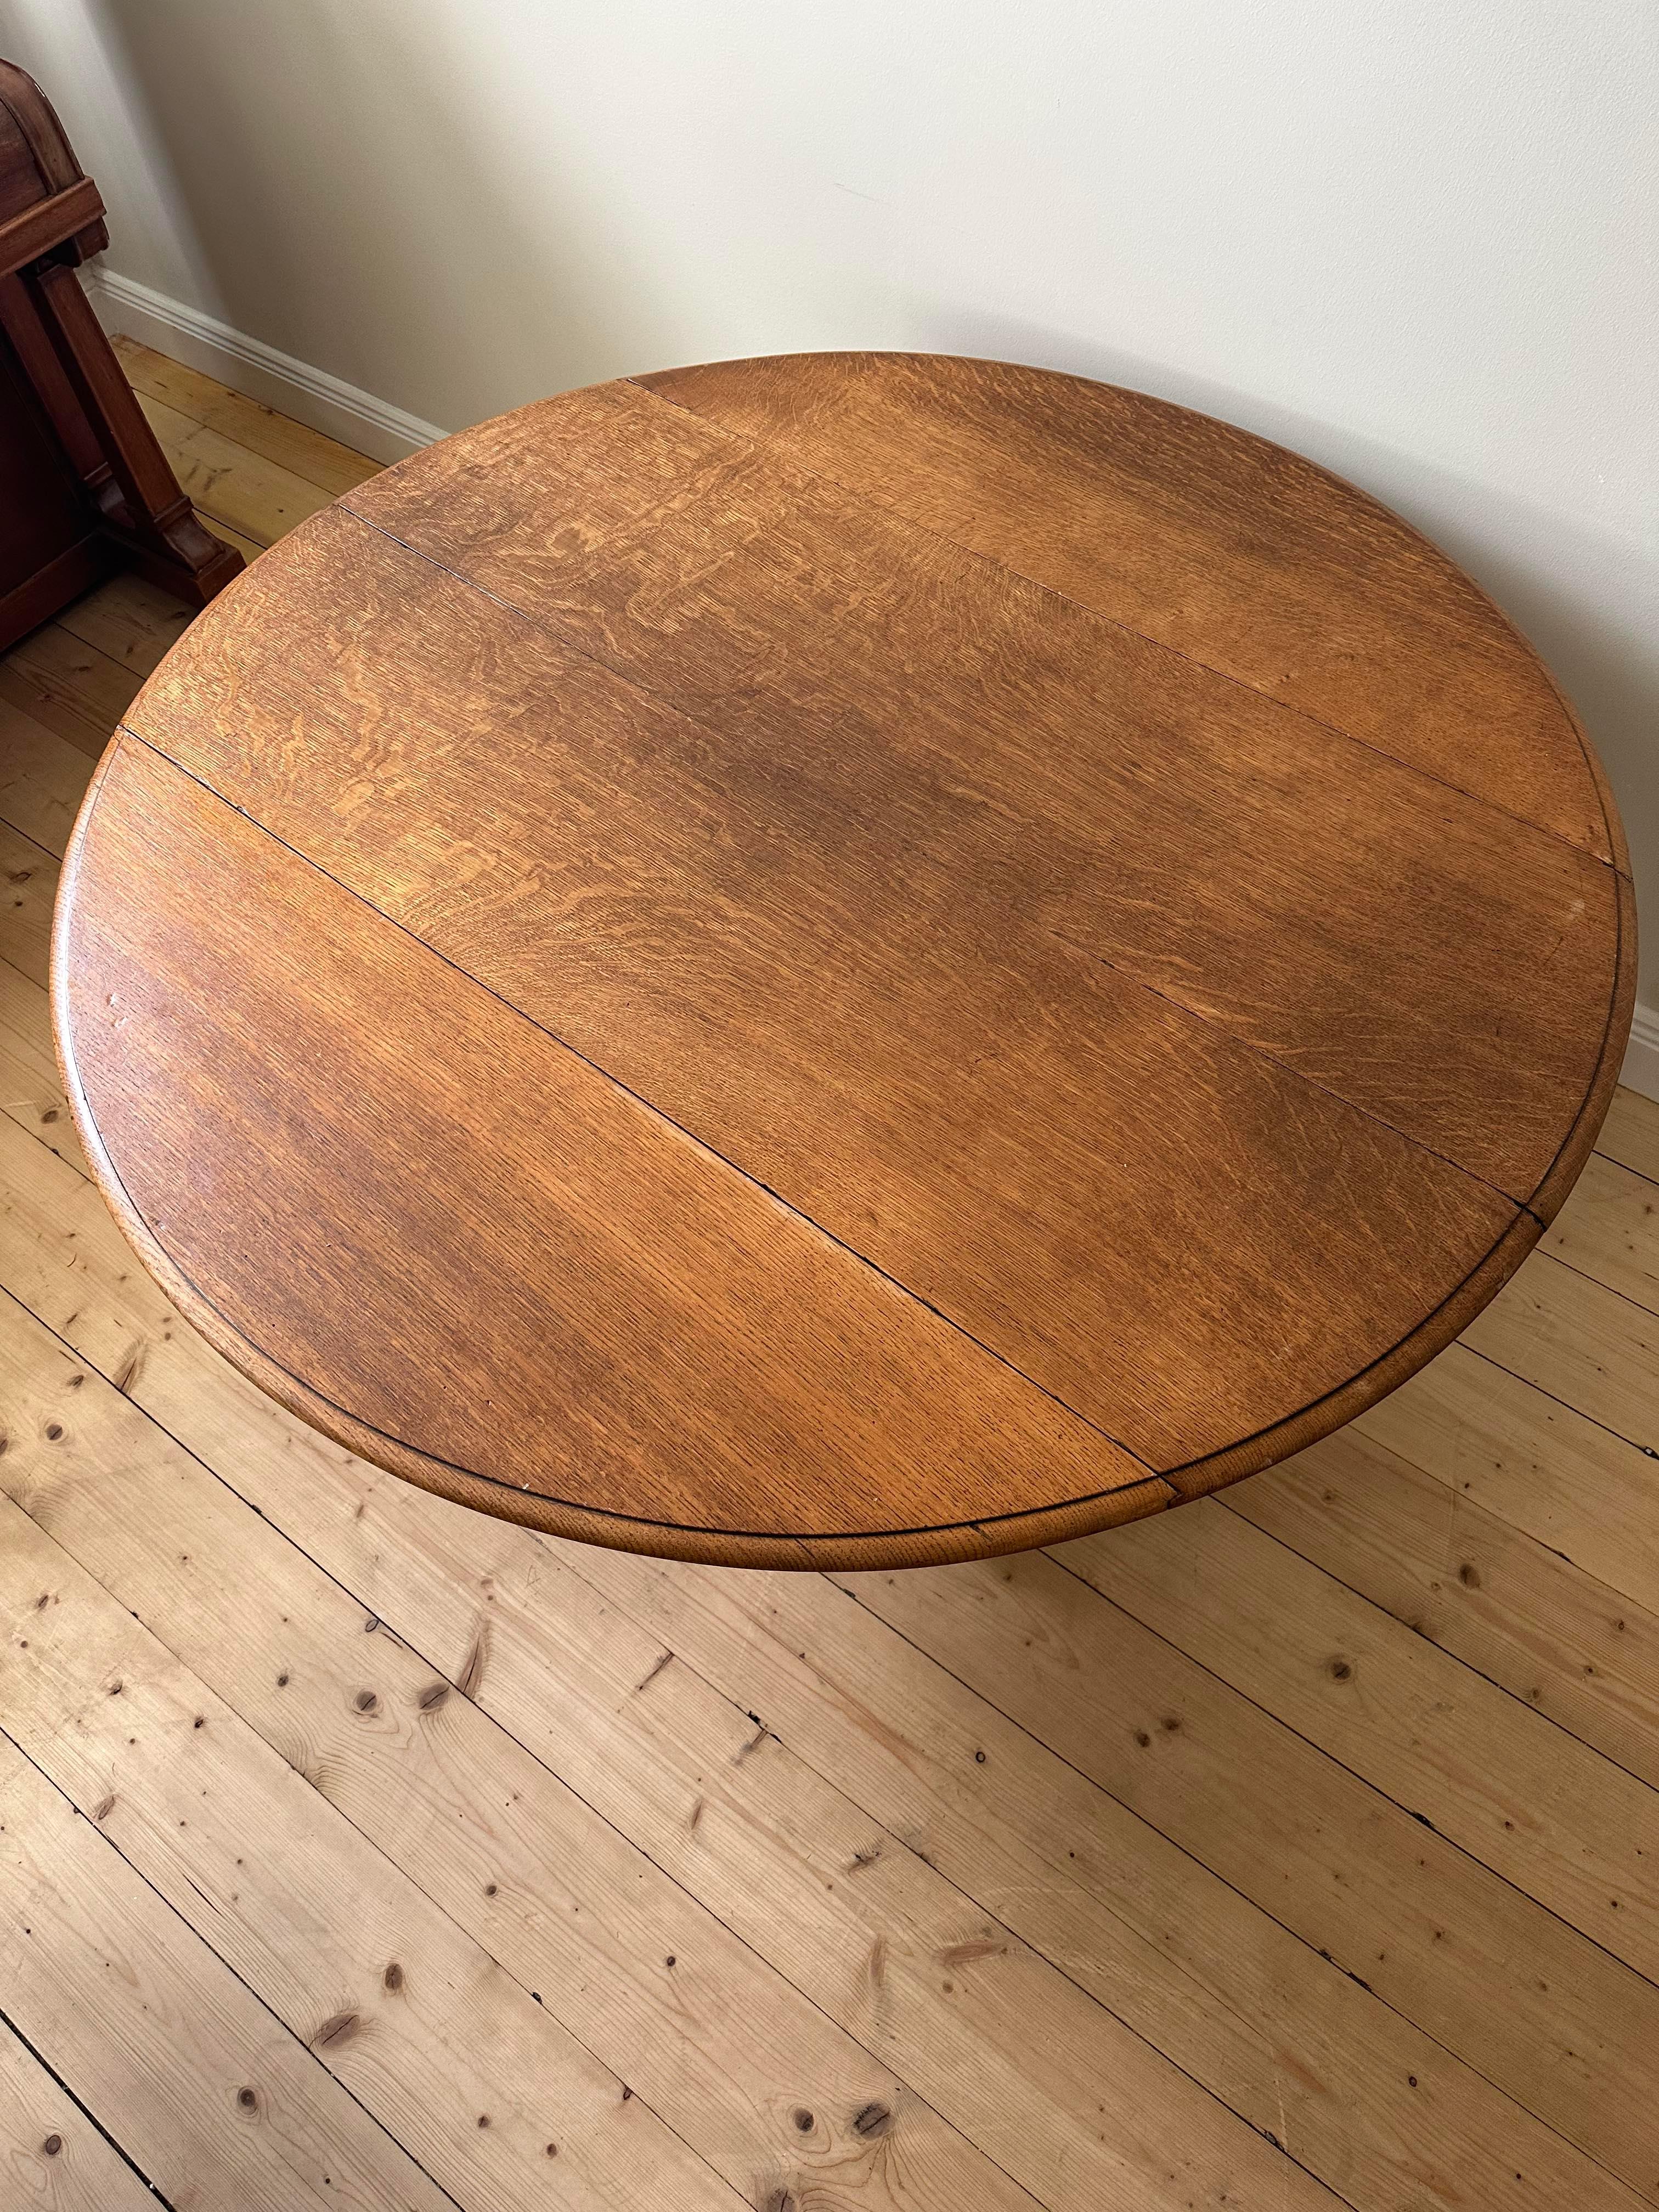 Beautiful table from Occitane in South-west of France with extension boards in veneer. 
Total L: 230 cm
Really good condition and beautiful legs. 